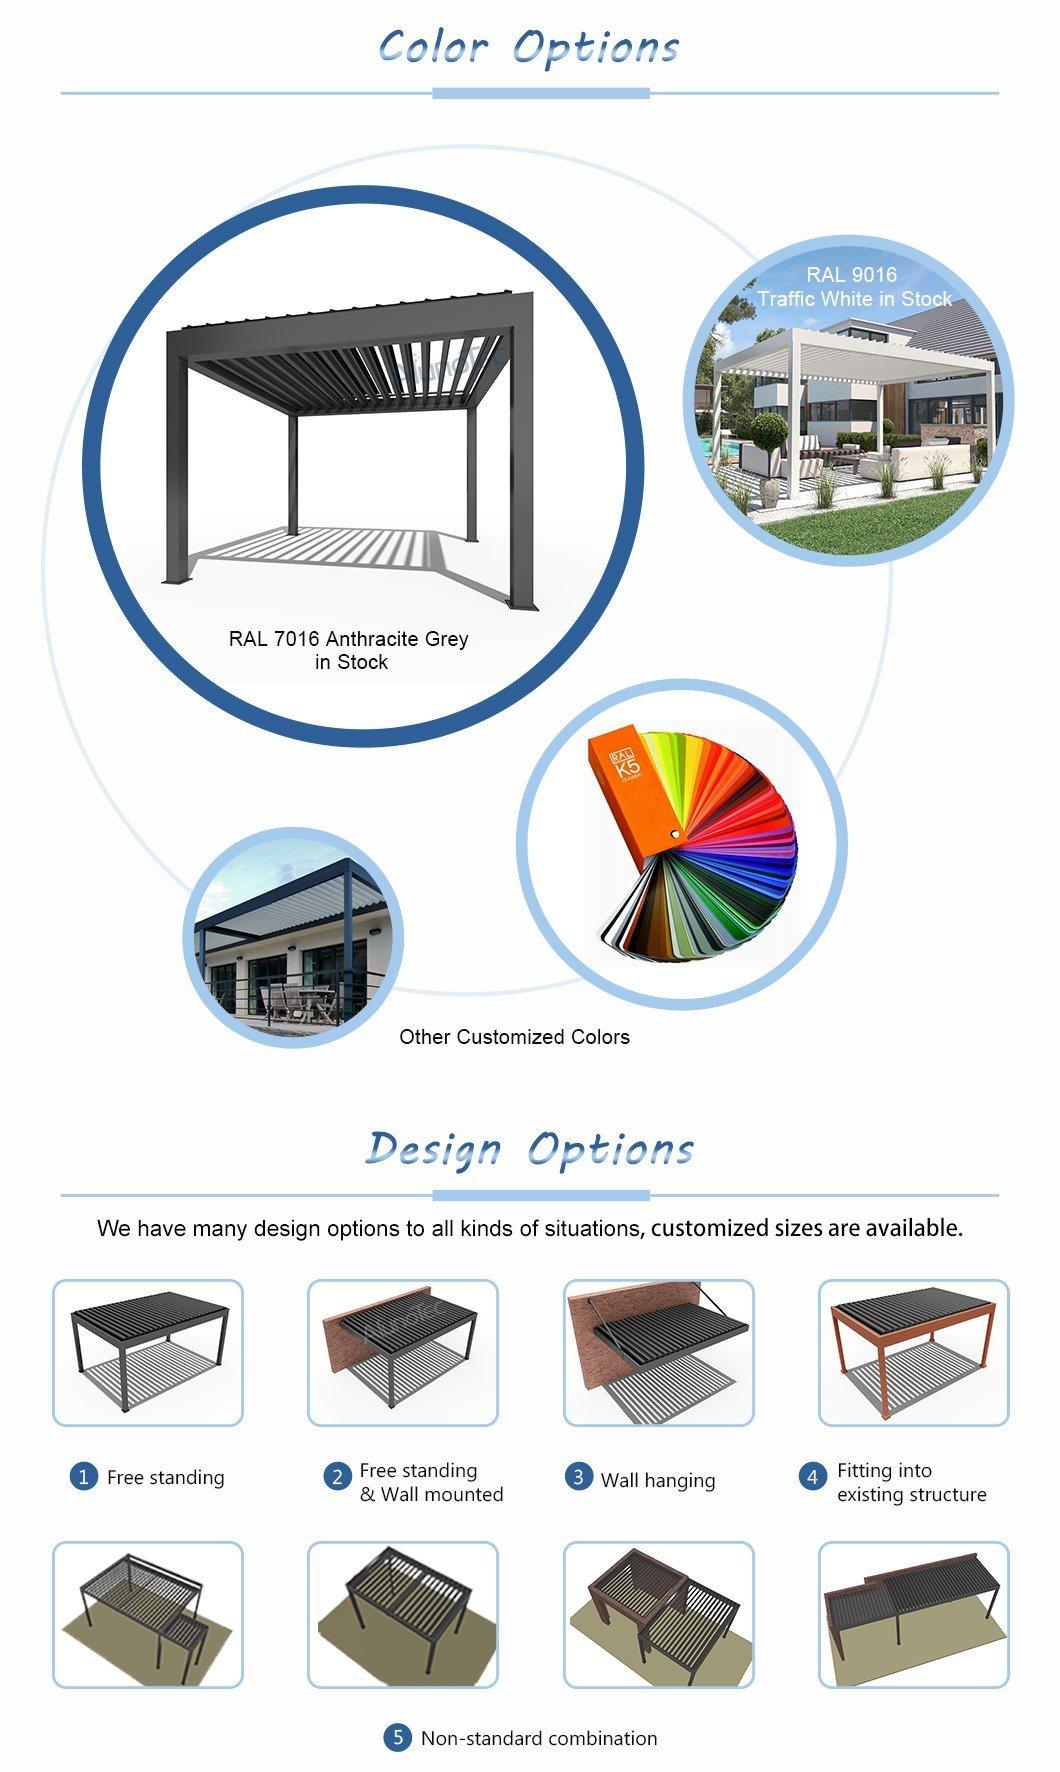 Quality Chinese Bioclimatic Pergola Louvered Roof for Barbecue